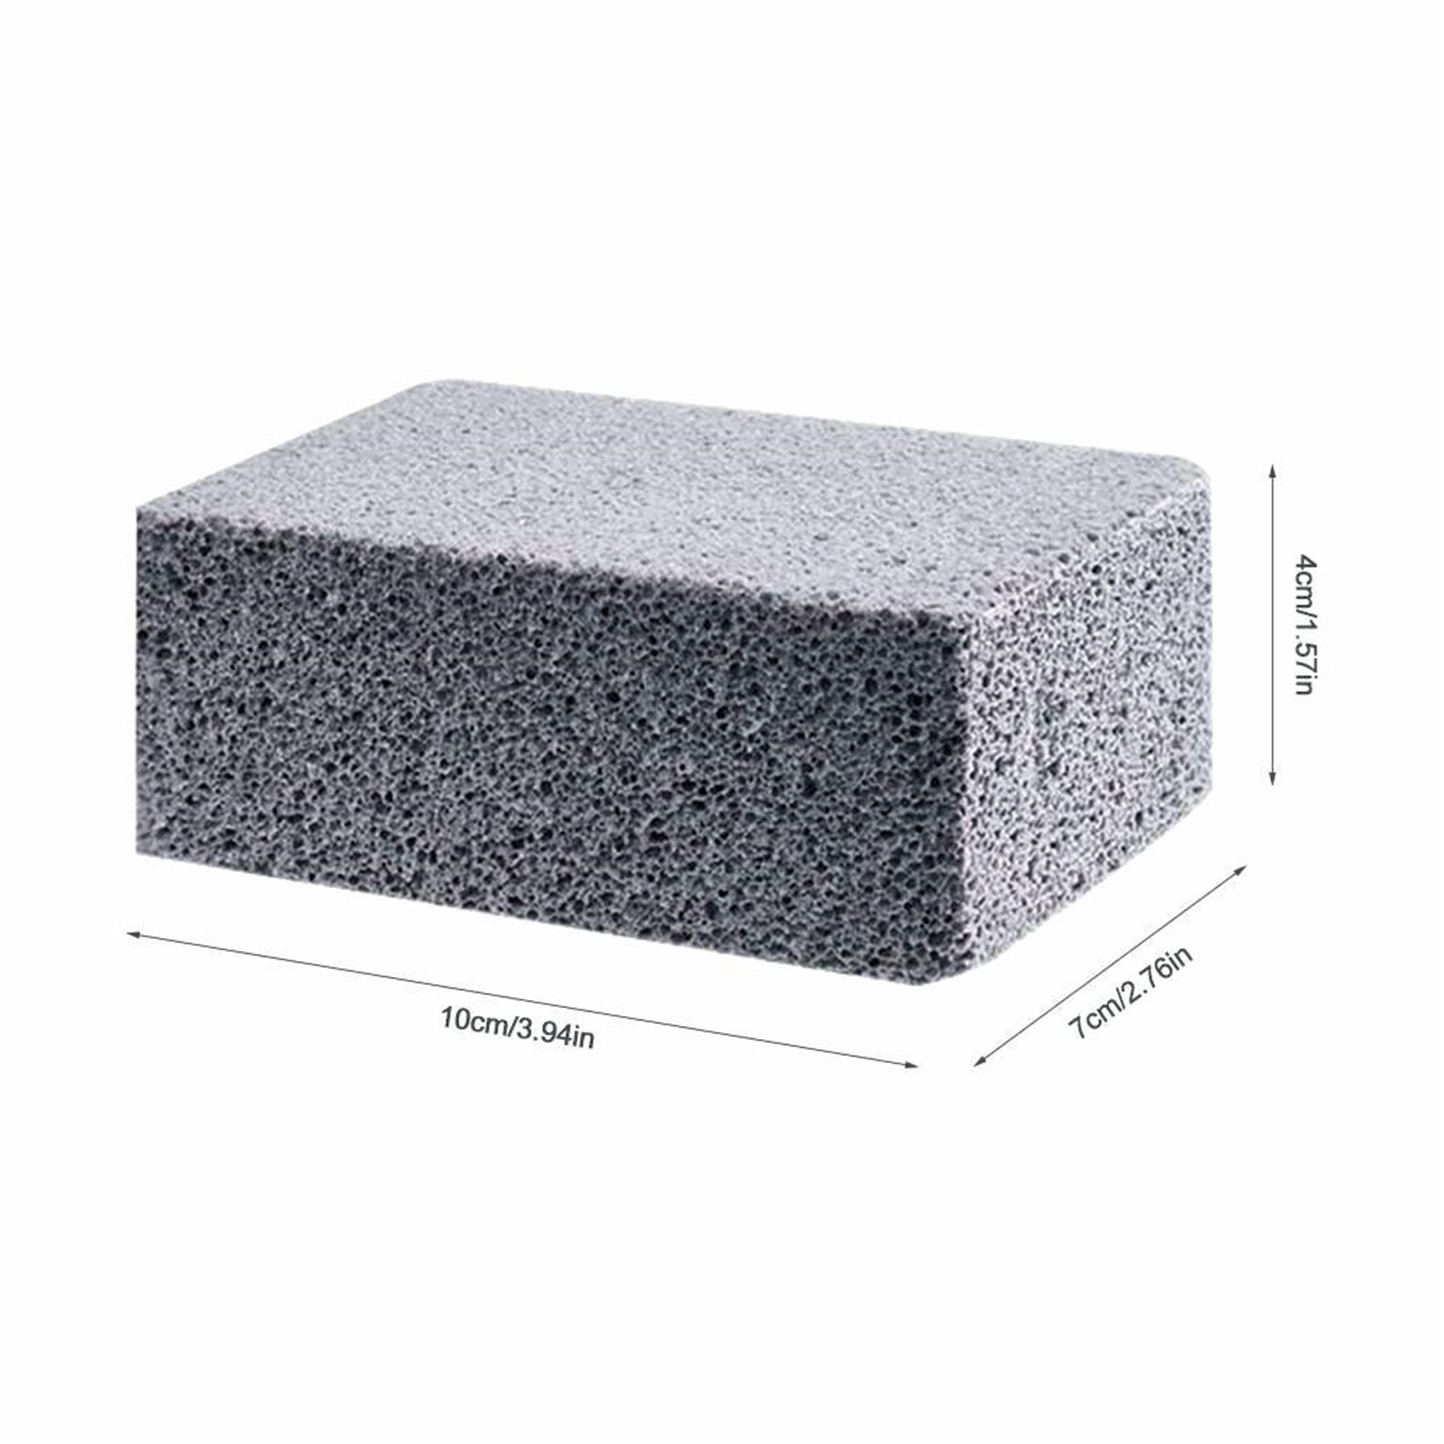  Large Grill Stone Cleaning Block - 4 Inch Pumice Bricks for Cleaning Grease & Rust